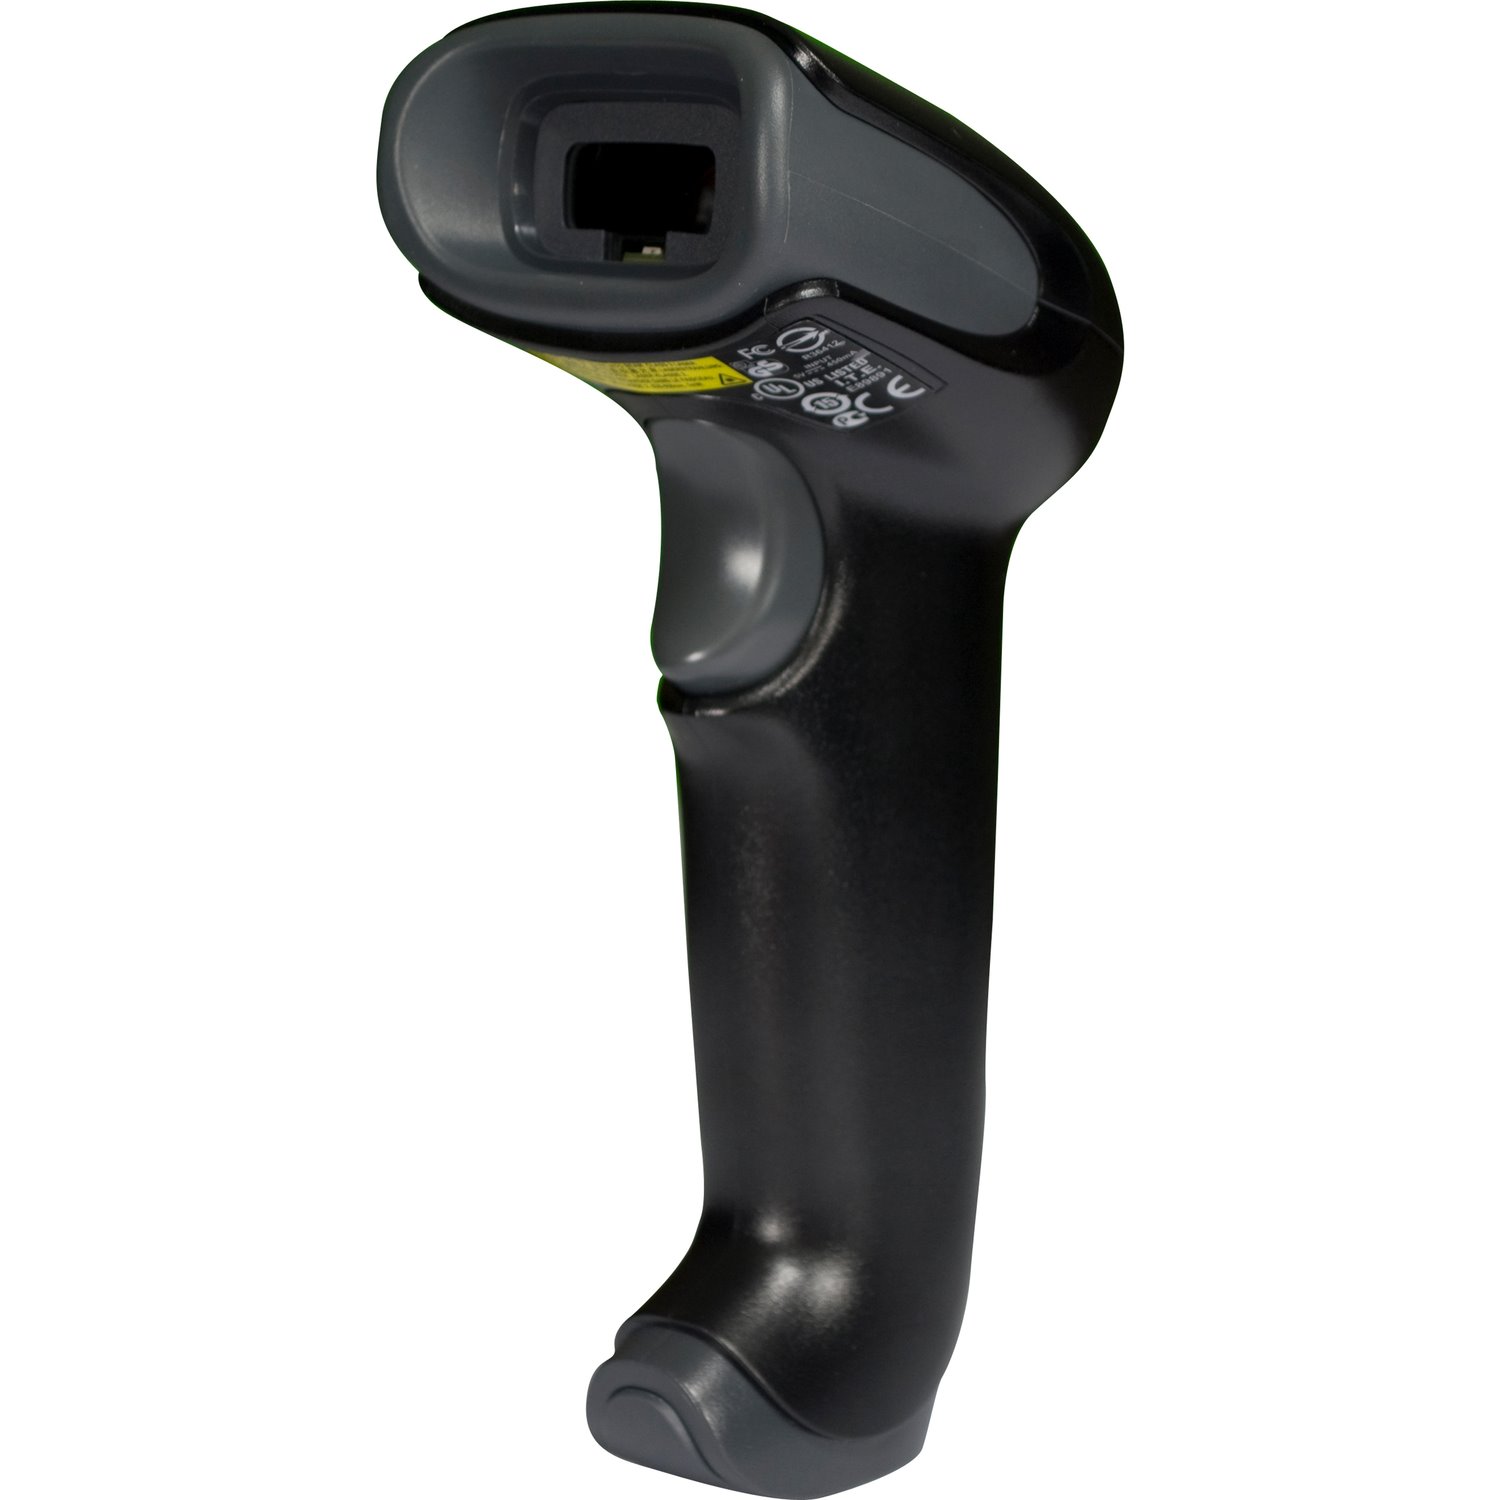 Honeywell Voyager 1250g Handheld Barcode Scanner - Cable Connectivity - Black